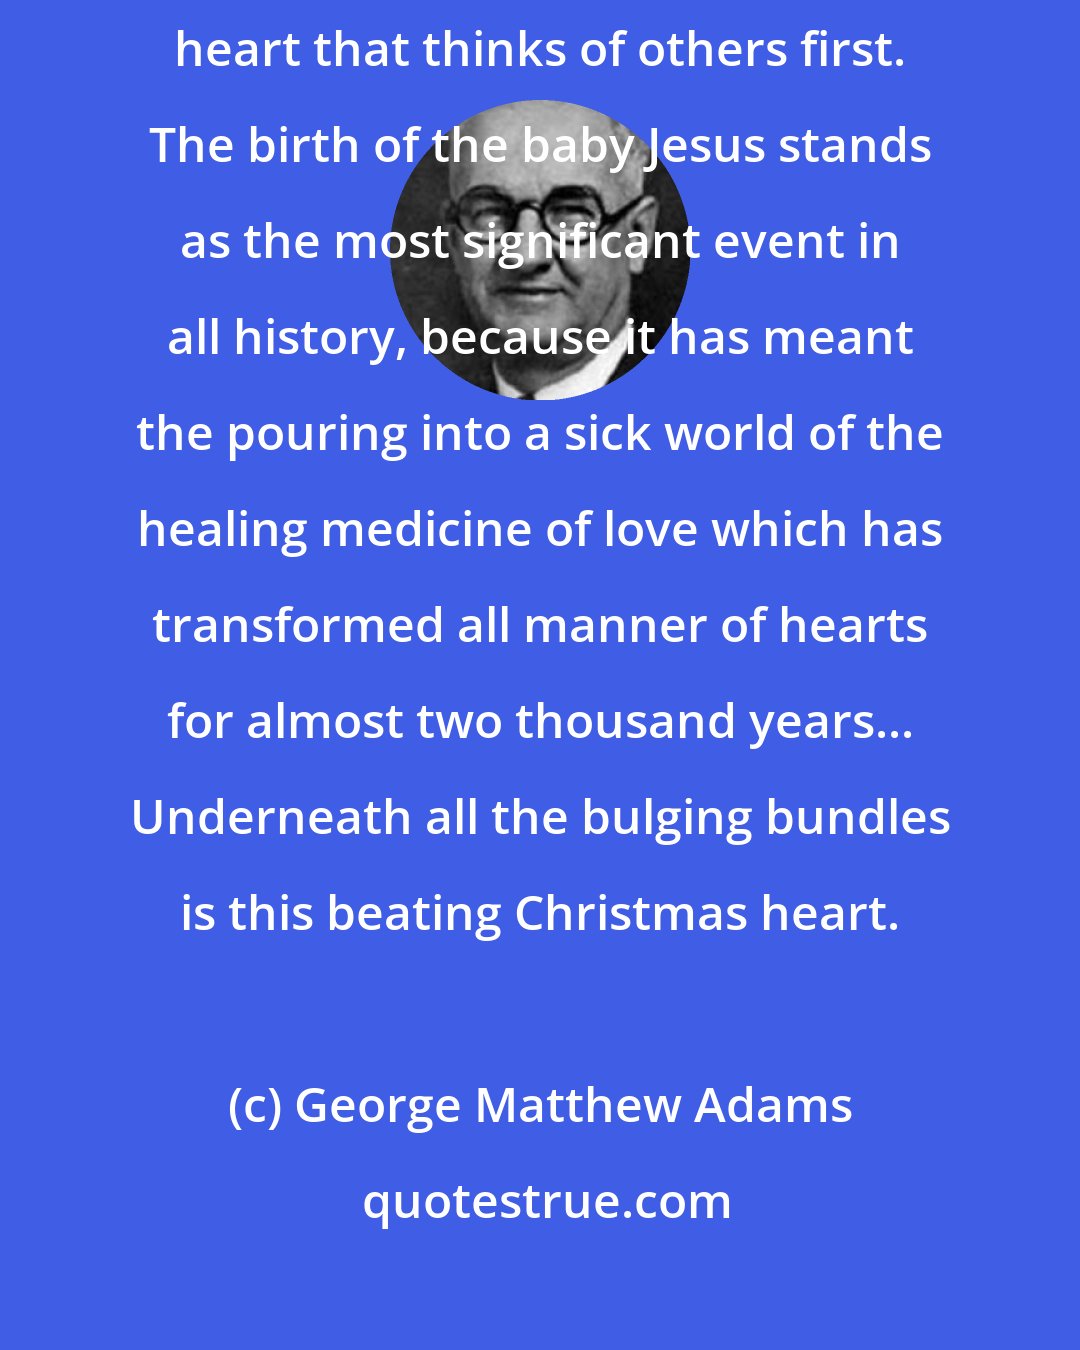 George Matthew Adams: Let us remember that the Christmas heart is a giving heart, a wide open heart that thinks of others first. The birth of the baby Jesus stands as the most significant event in all history, because it has meant the pouring into a sick world of the healing medicine of love which has transformed all manner of hearts for almost two thousand years... Underneath all the bulging bundles is this beating Christmas heart.